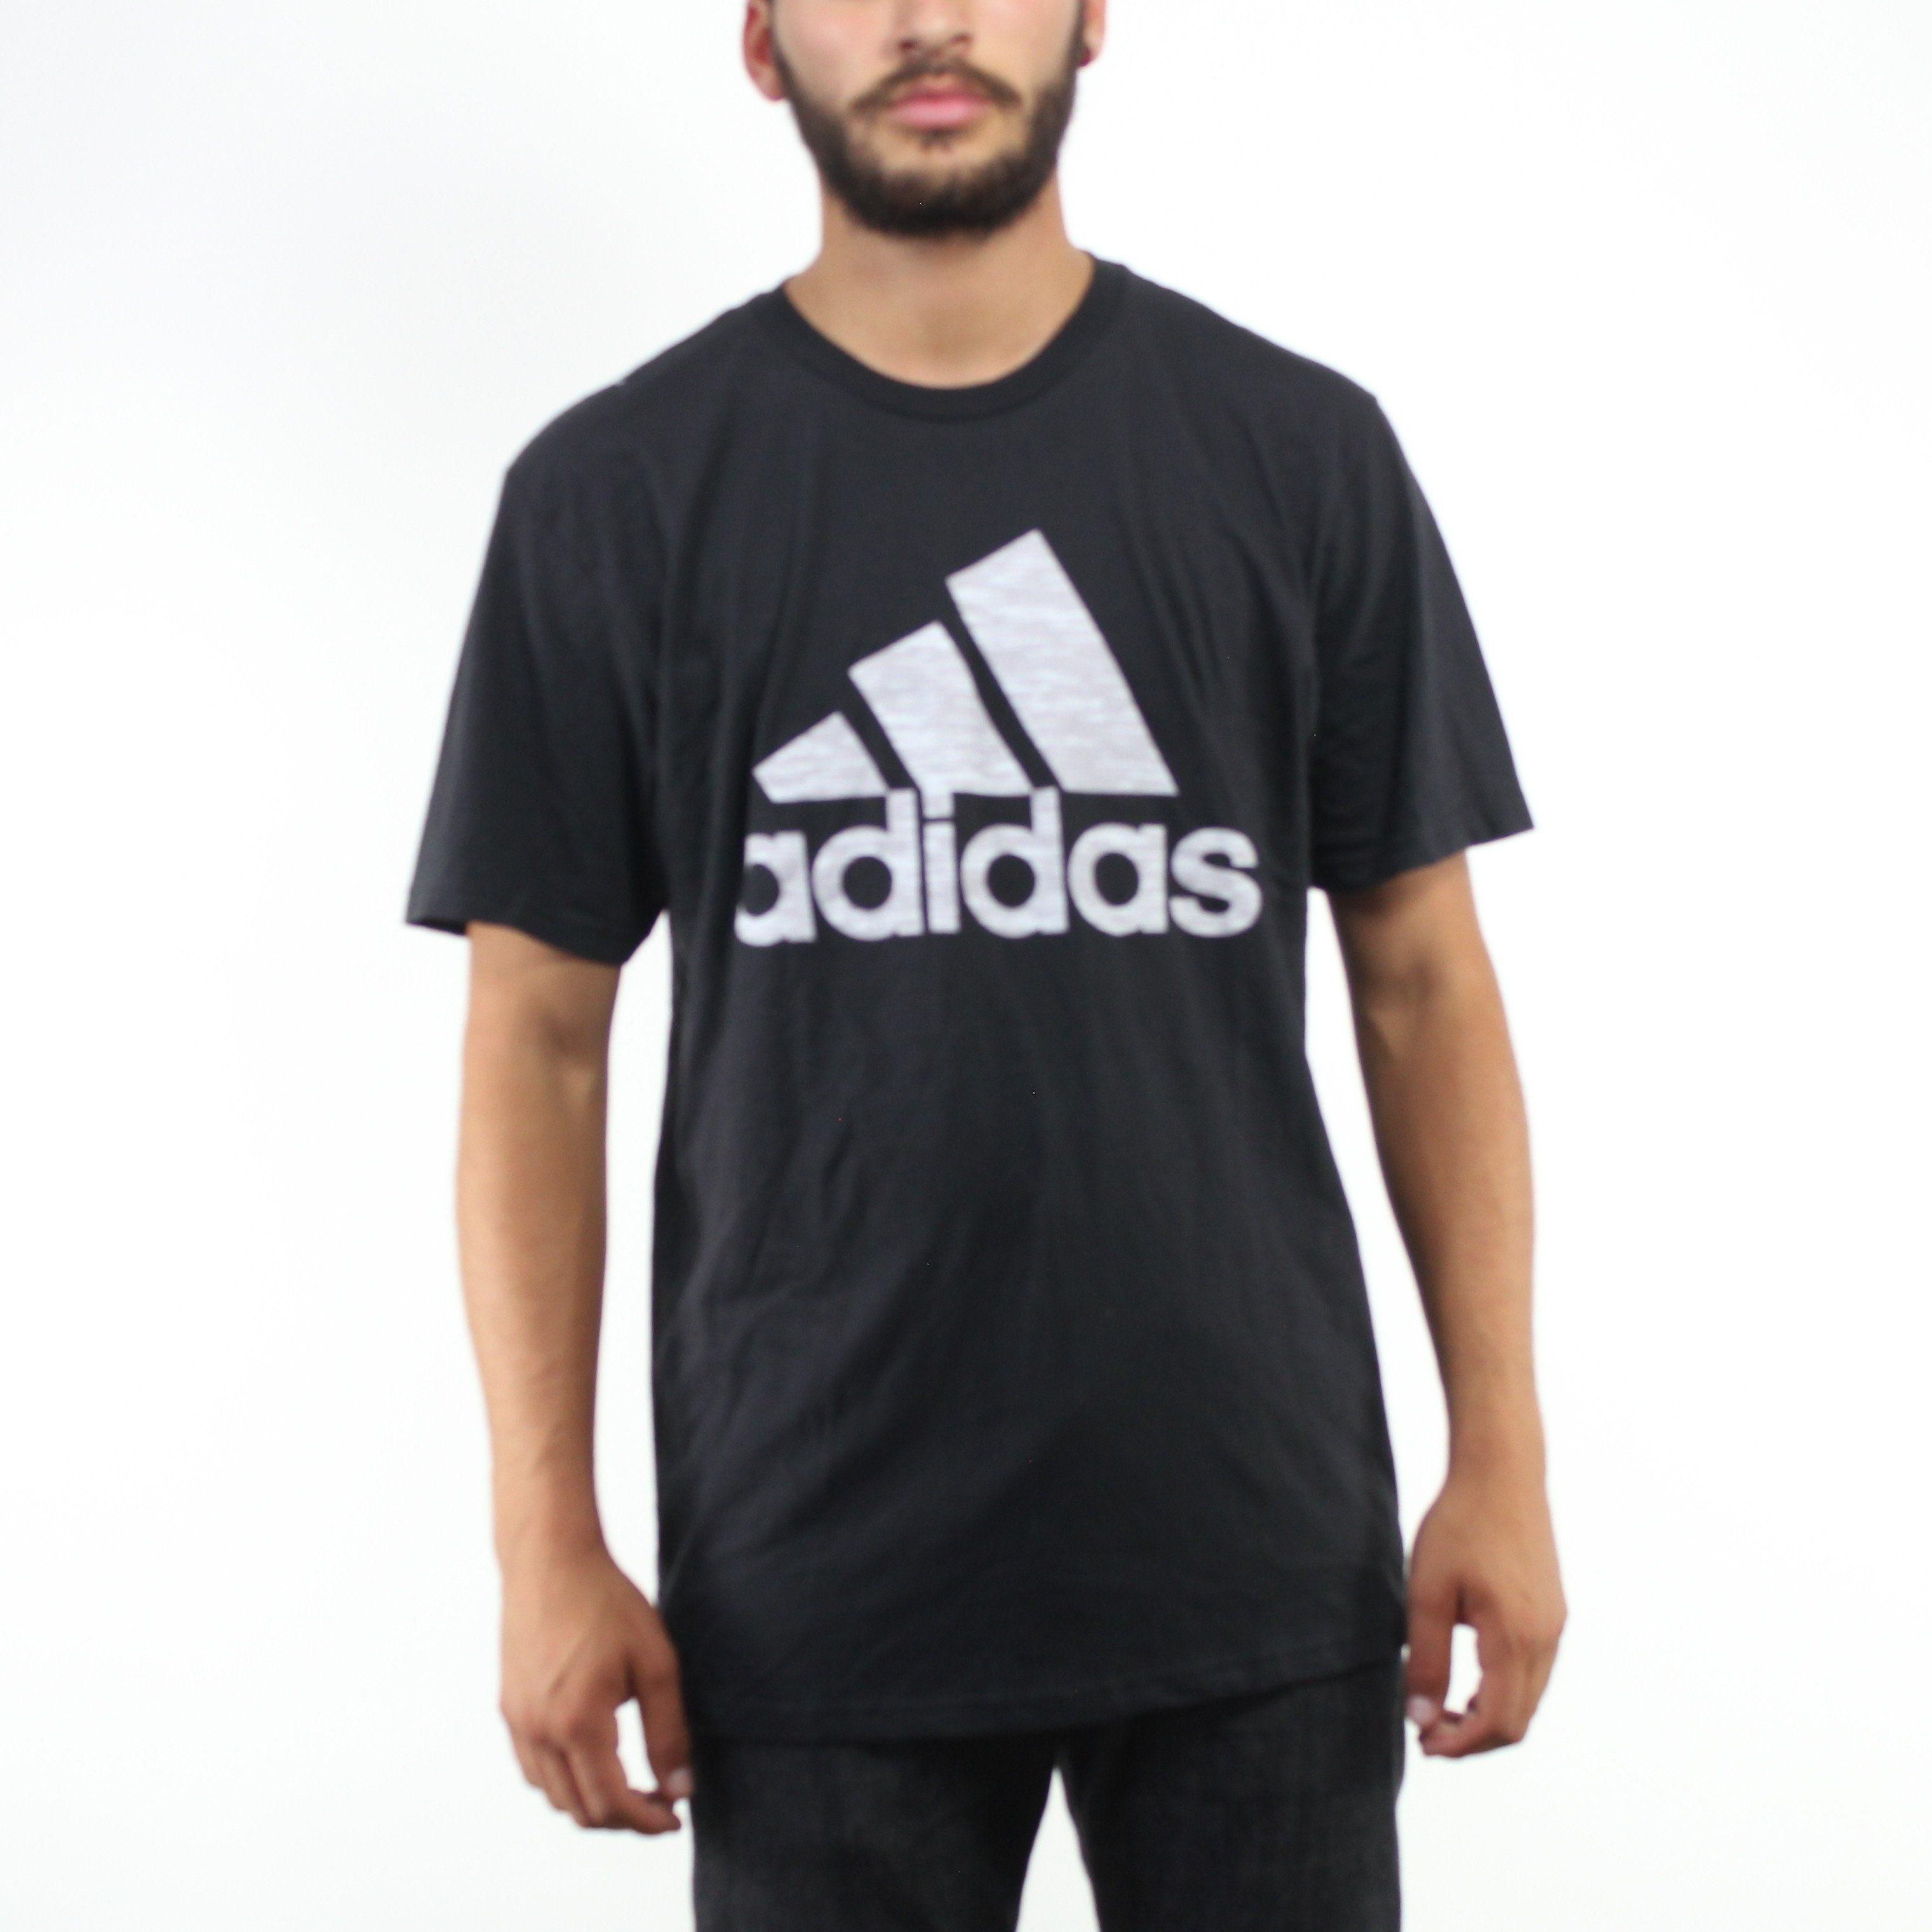 Grey with Lines Logo - Adidas Gray And White Lines Performance Logo Men's Black T-shirt ...